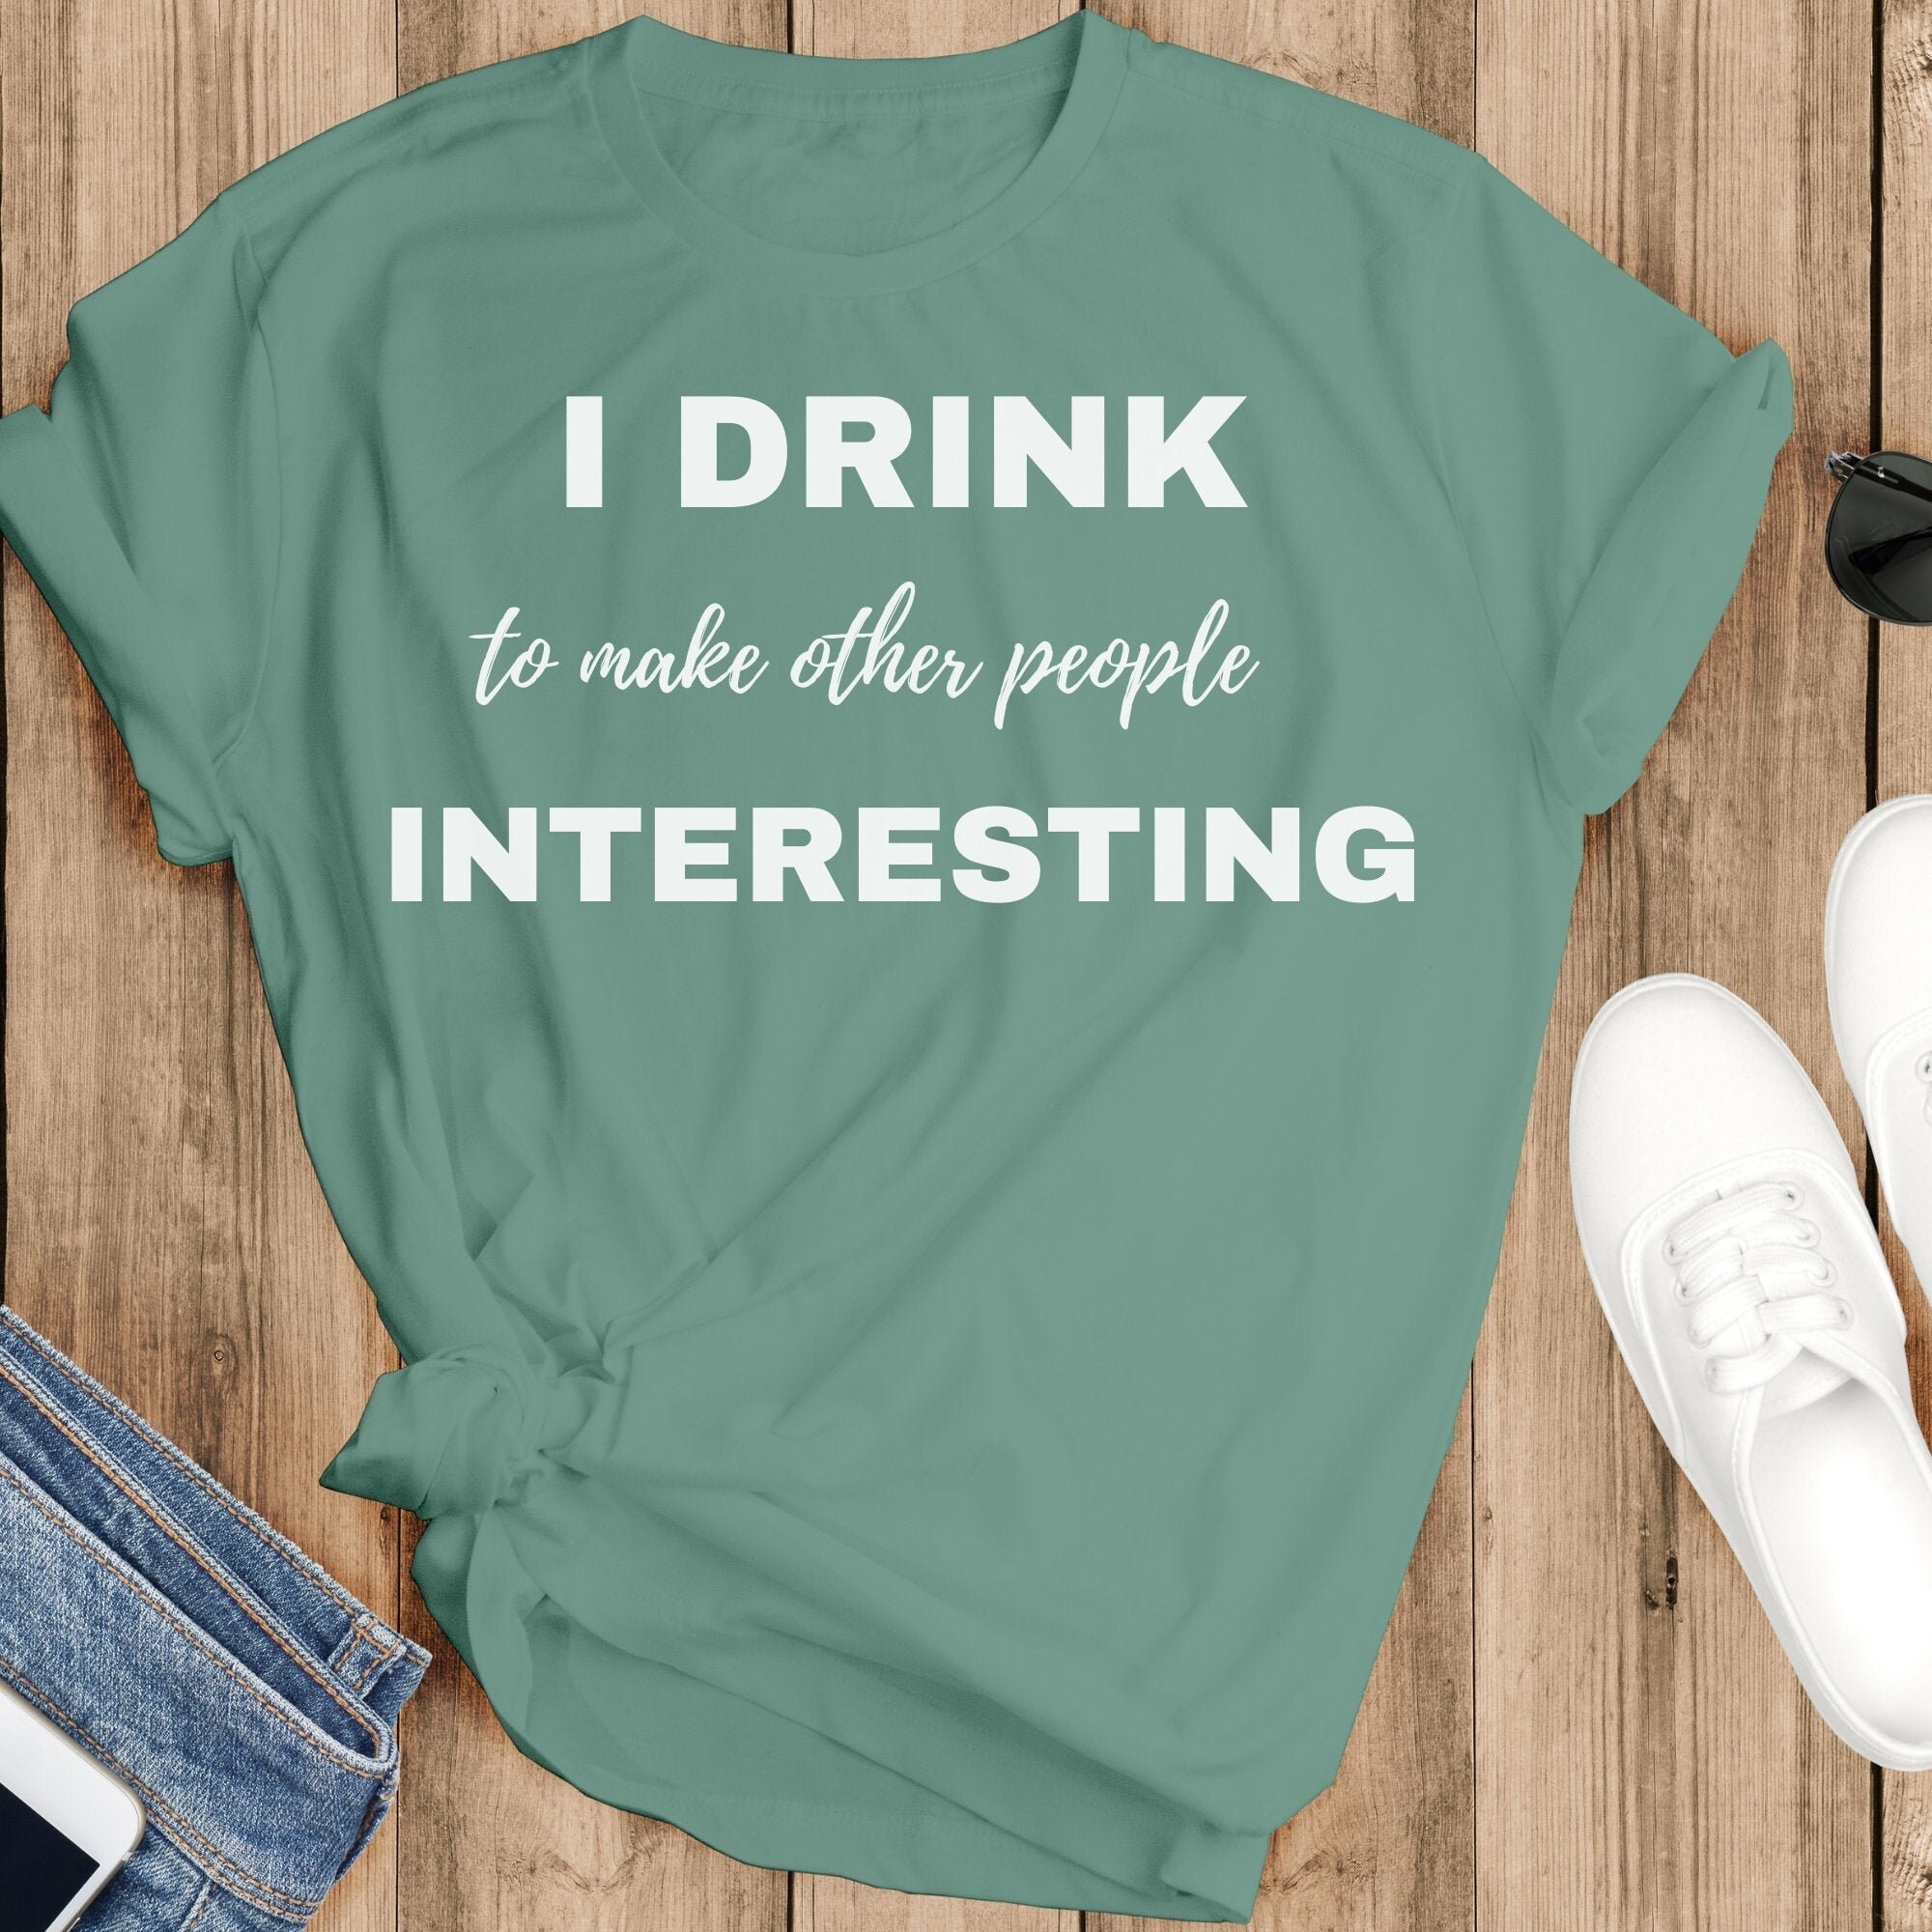 Details about   FUNNY BEER T-SHIRT/DRINKING/DRINK THEME/UNISEX LADIES MENS 